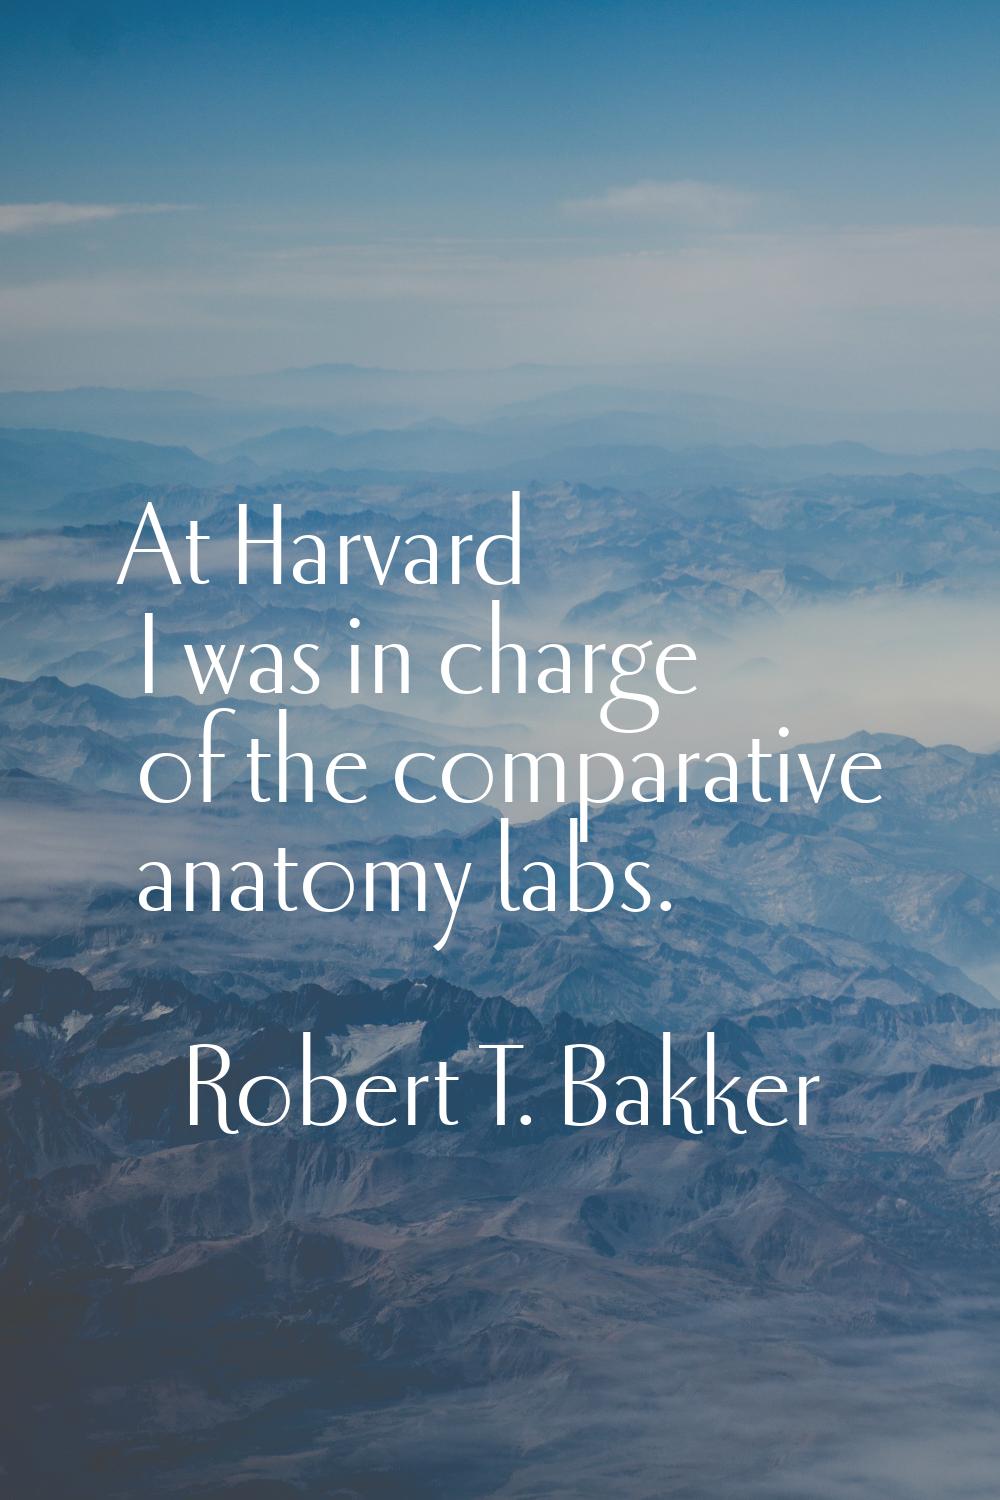 At Harvard I was in charge of the comparative anatomy labs.